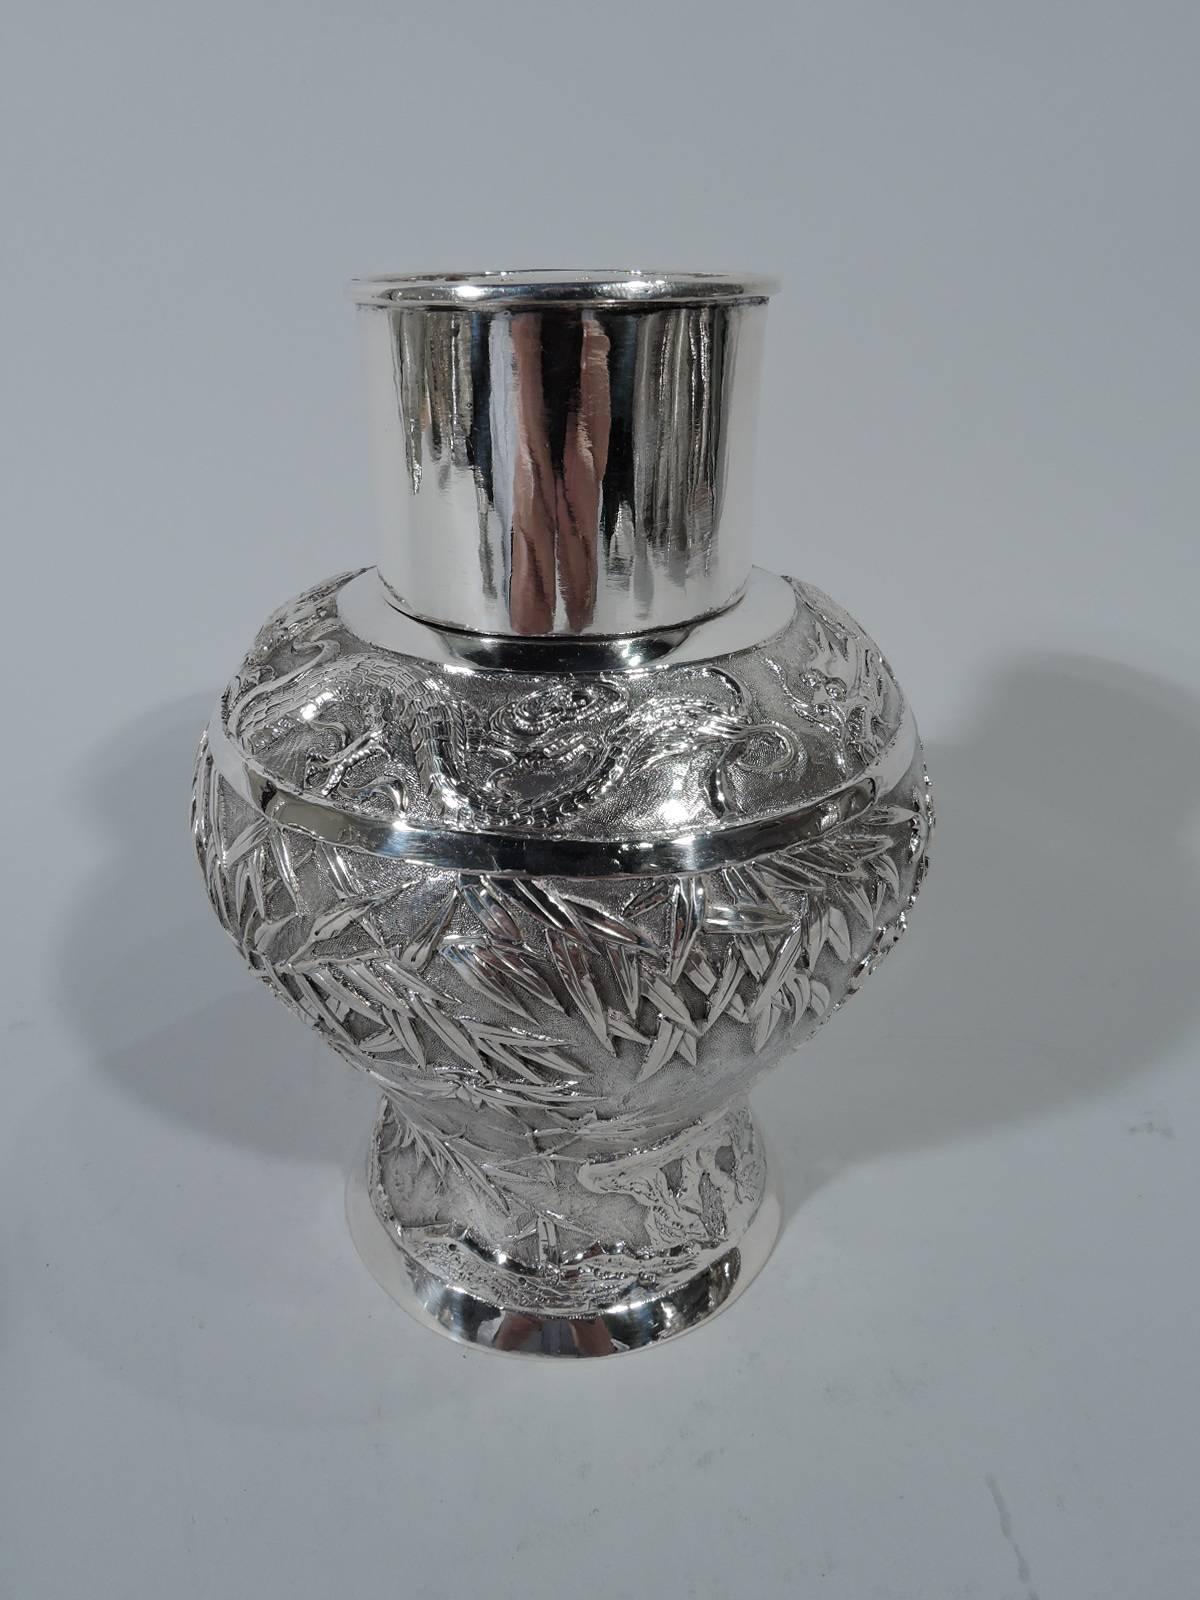 Chinese export silver tea caddy, circa 1900. Baluster with drum-form neck and cover. Chased and repousse bamboo and blossoming prunus branches on stippled ground. Plain band at shoulder. Also plain are foot rim, neck, and cover sides. Cover top has